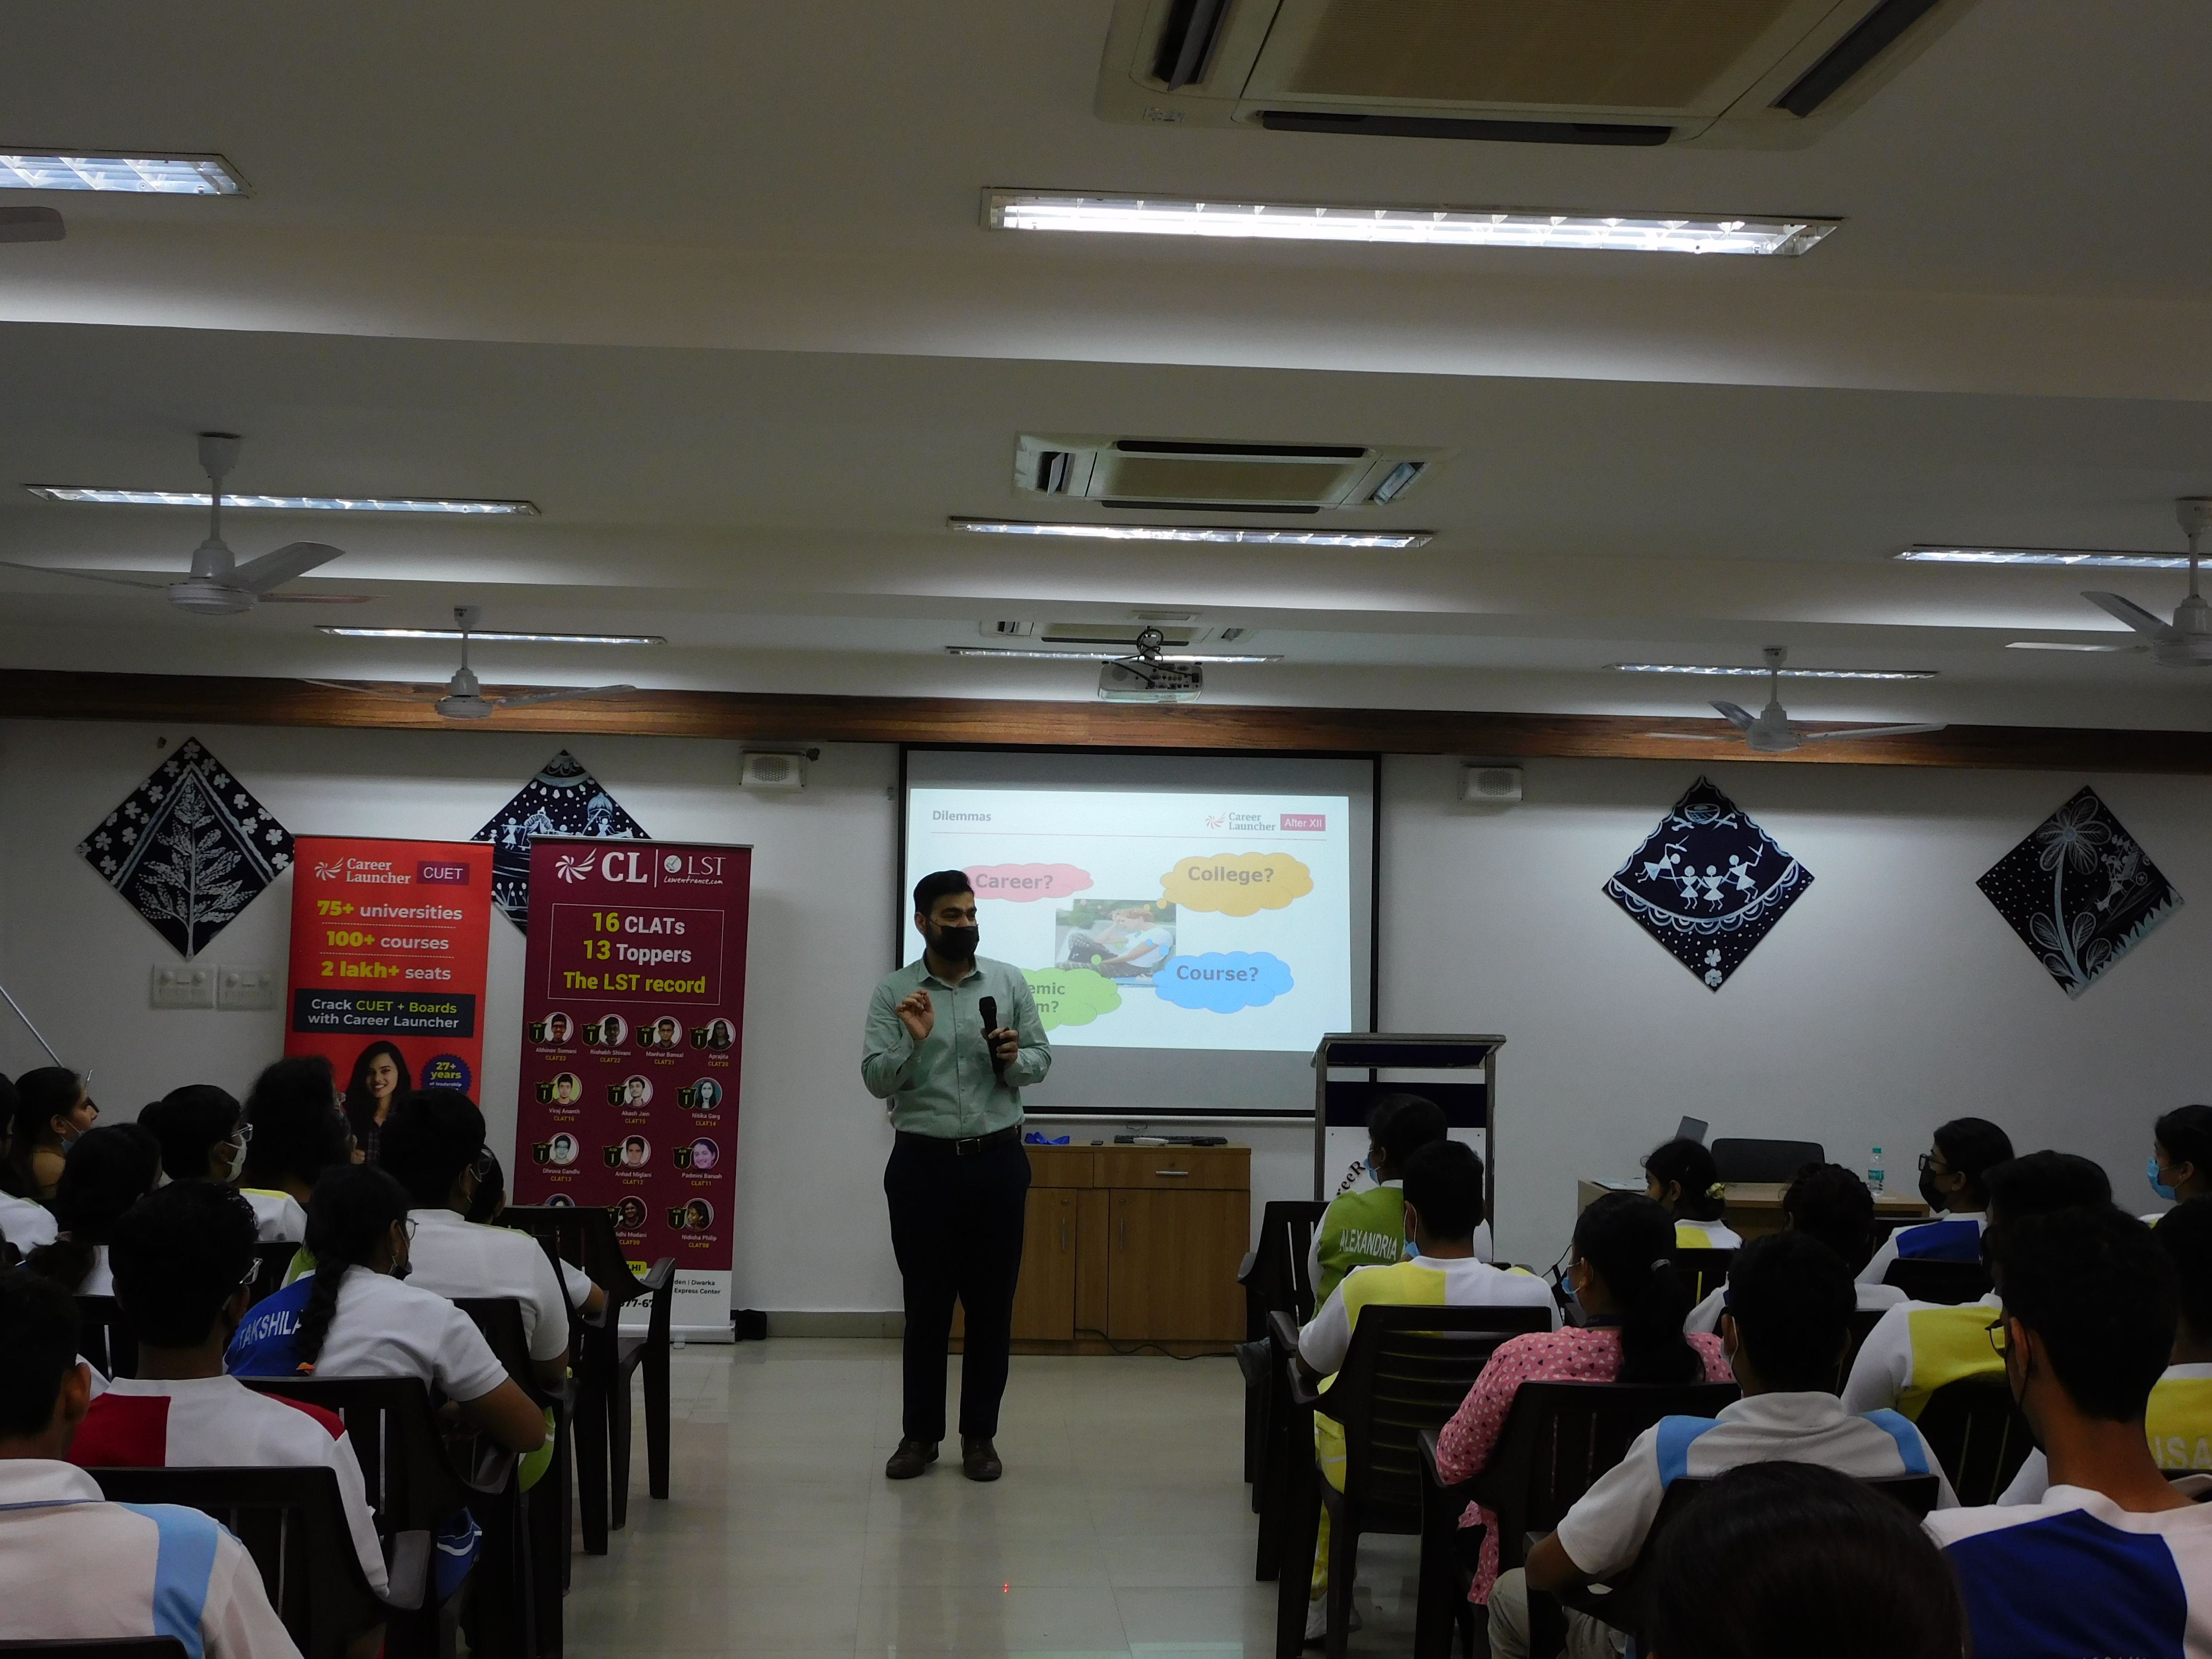 WORKSHOP ON CAREER COUNSELLING AND CUET